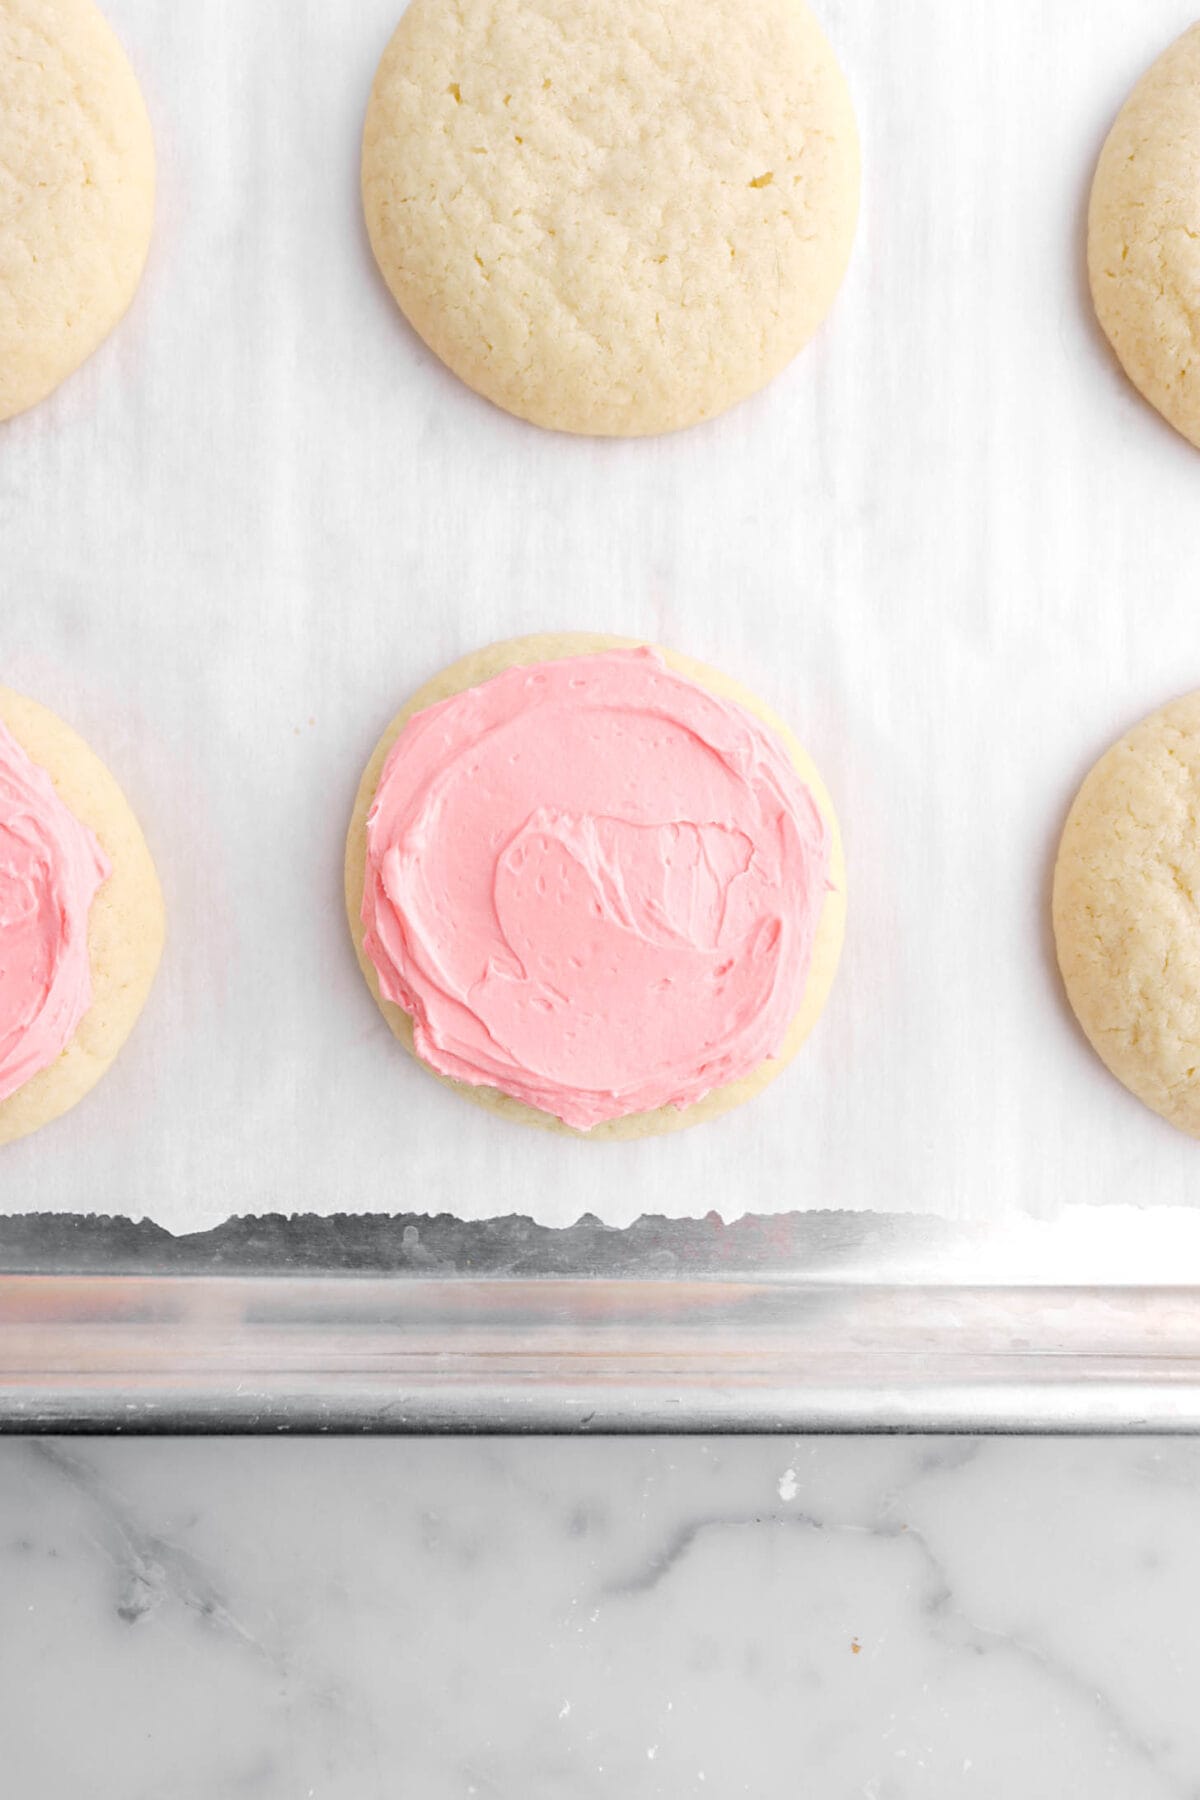 pink frosting spread across cookie.